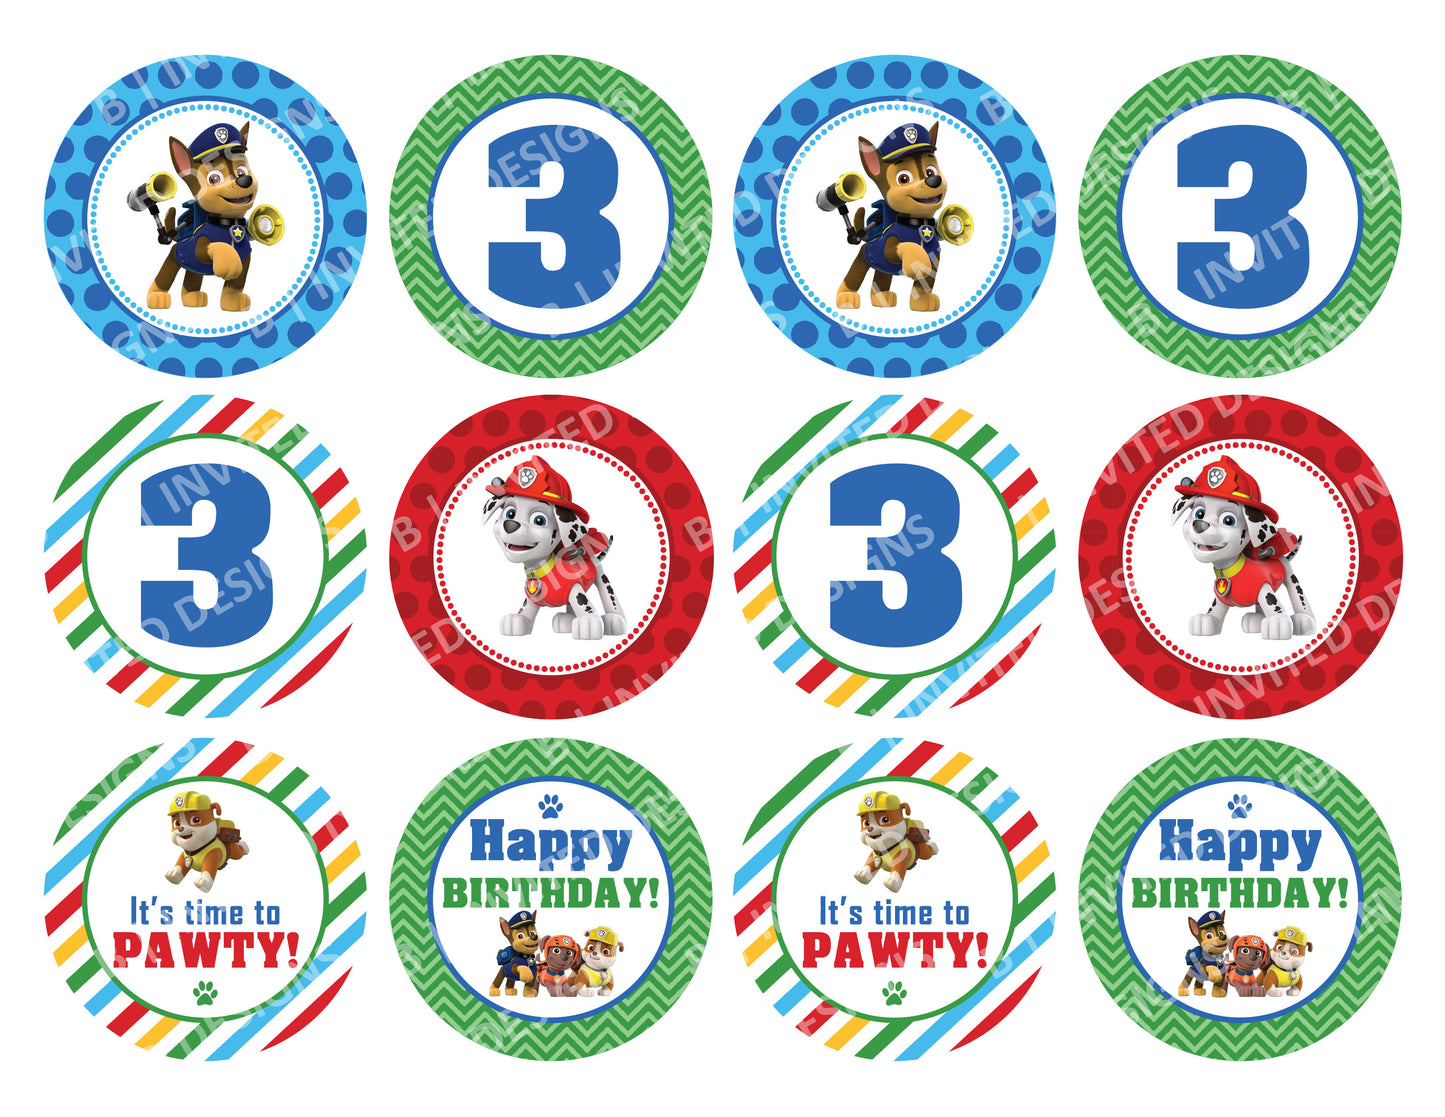 PAW PATROL Cupcake Toppers! 2 Inch or 2.5 Inch! Digital OR Printed & Fully Assembled!